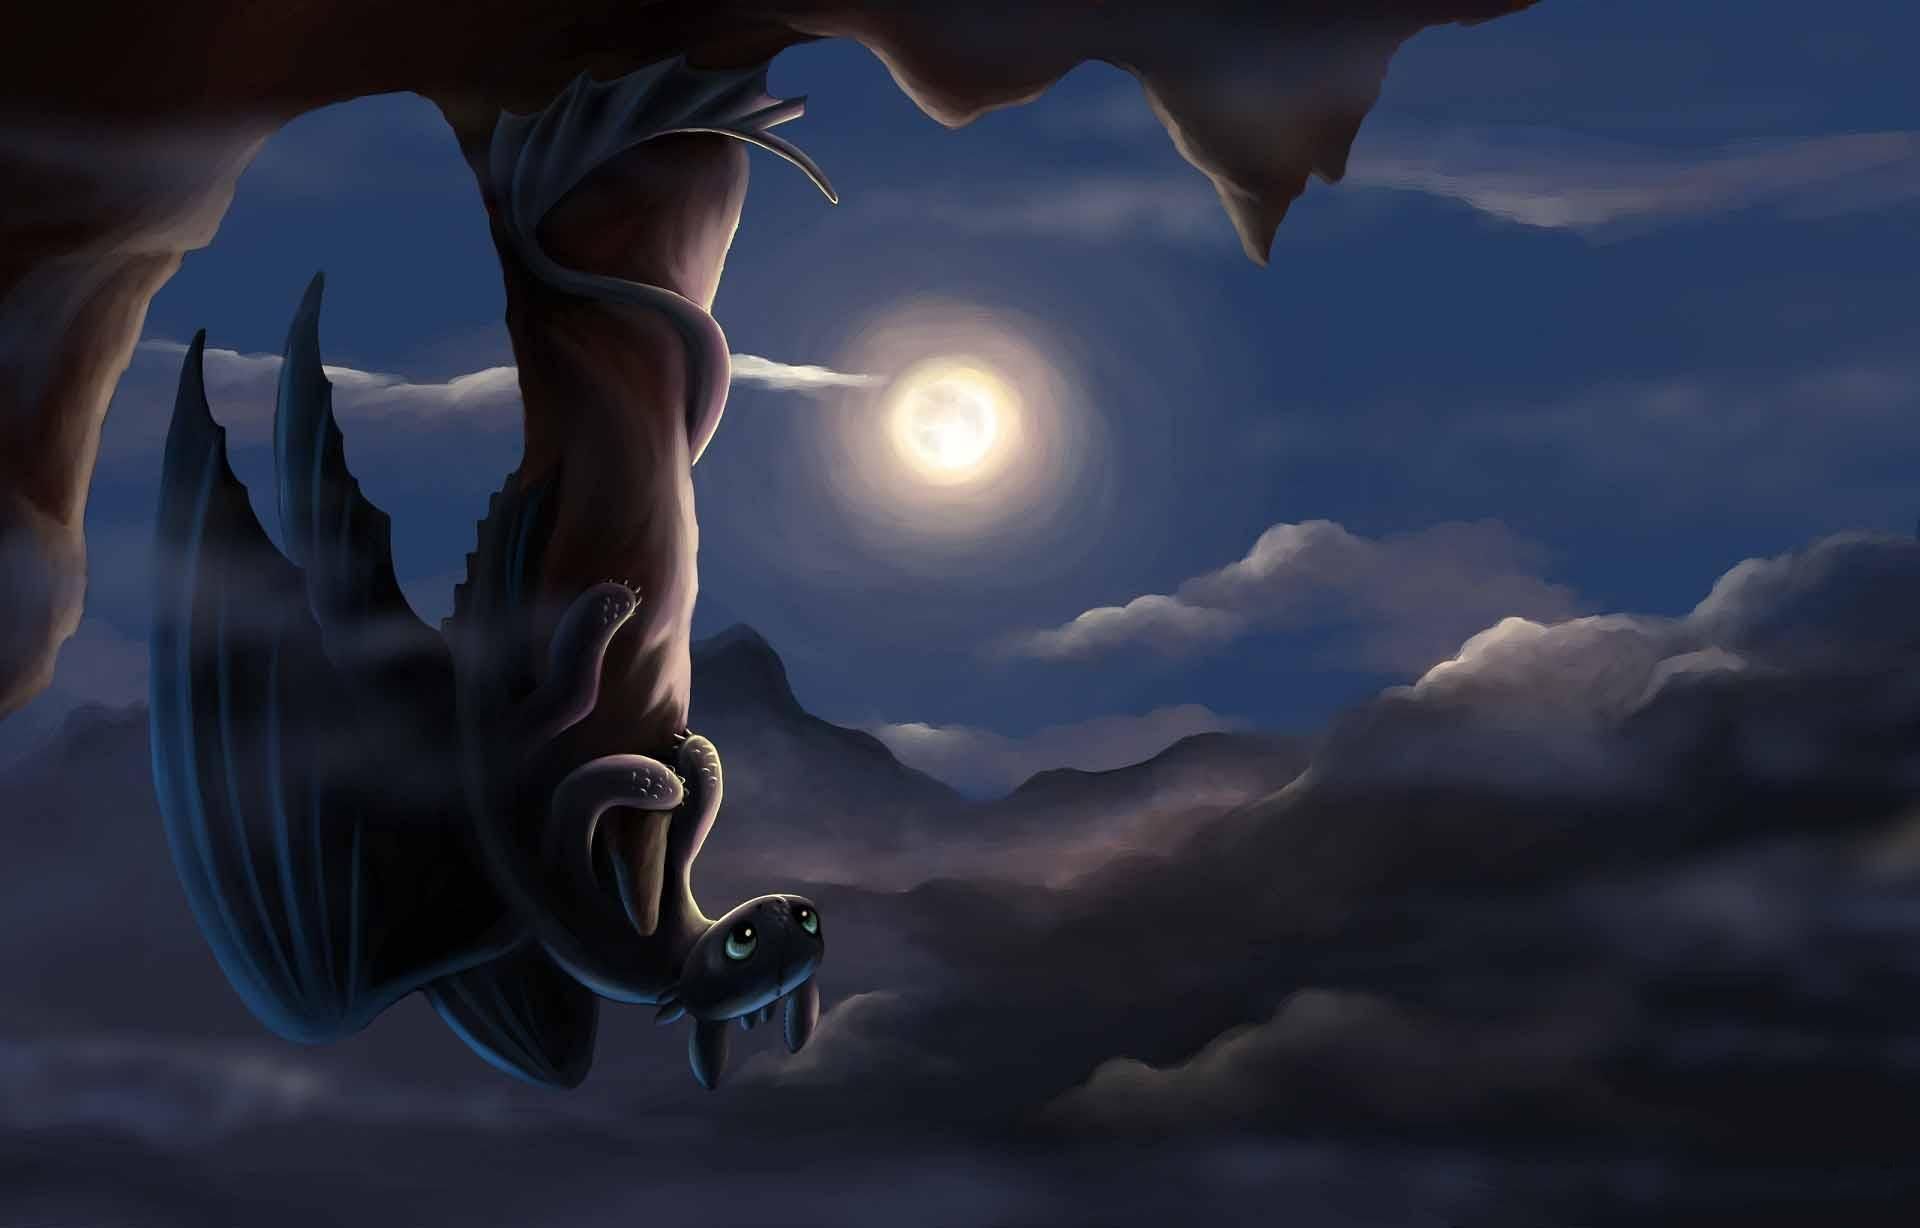 How To Train Your Dragon Wallpaper Full Hd 18 Free Wallpaper ...